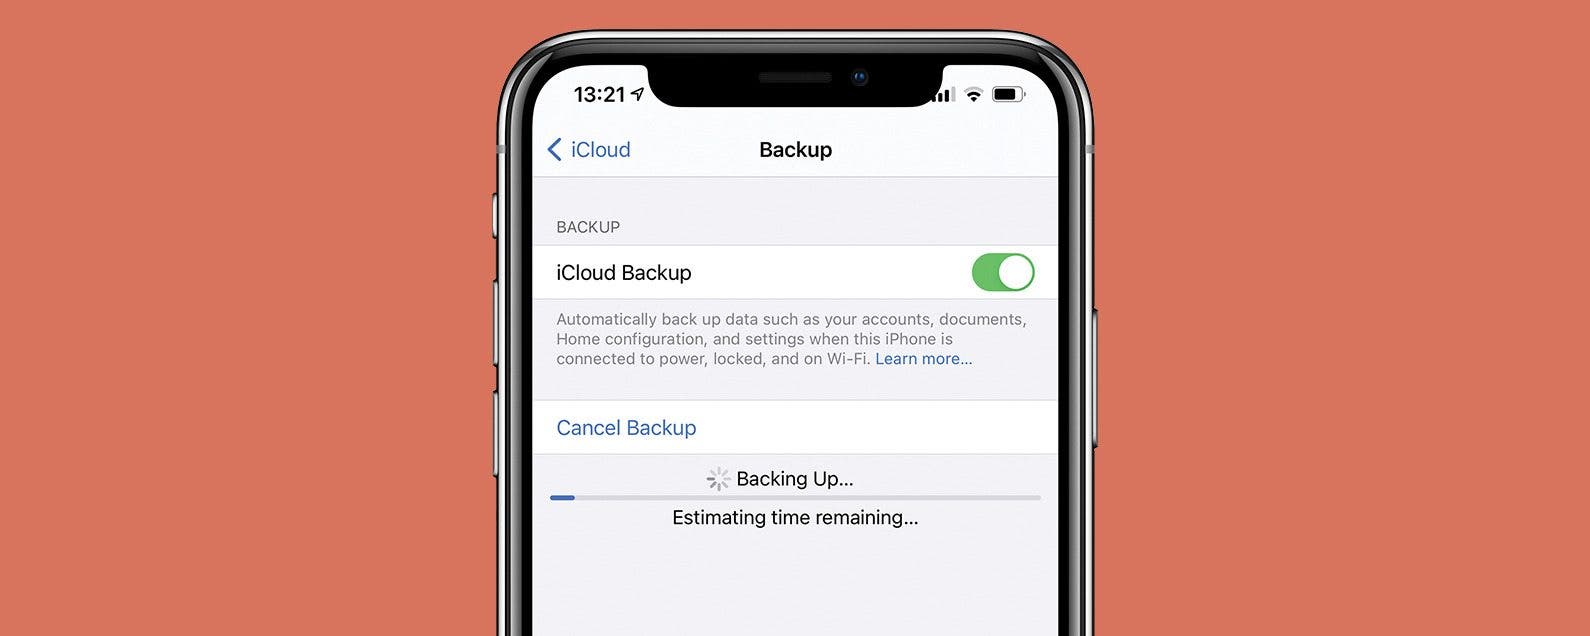 how to backup iphone to icloud on iphone 6